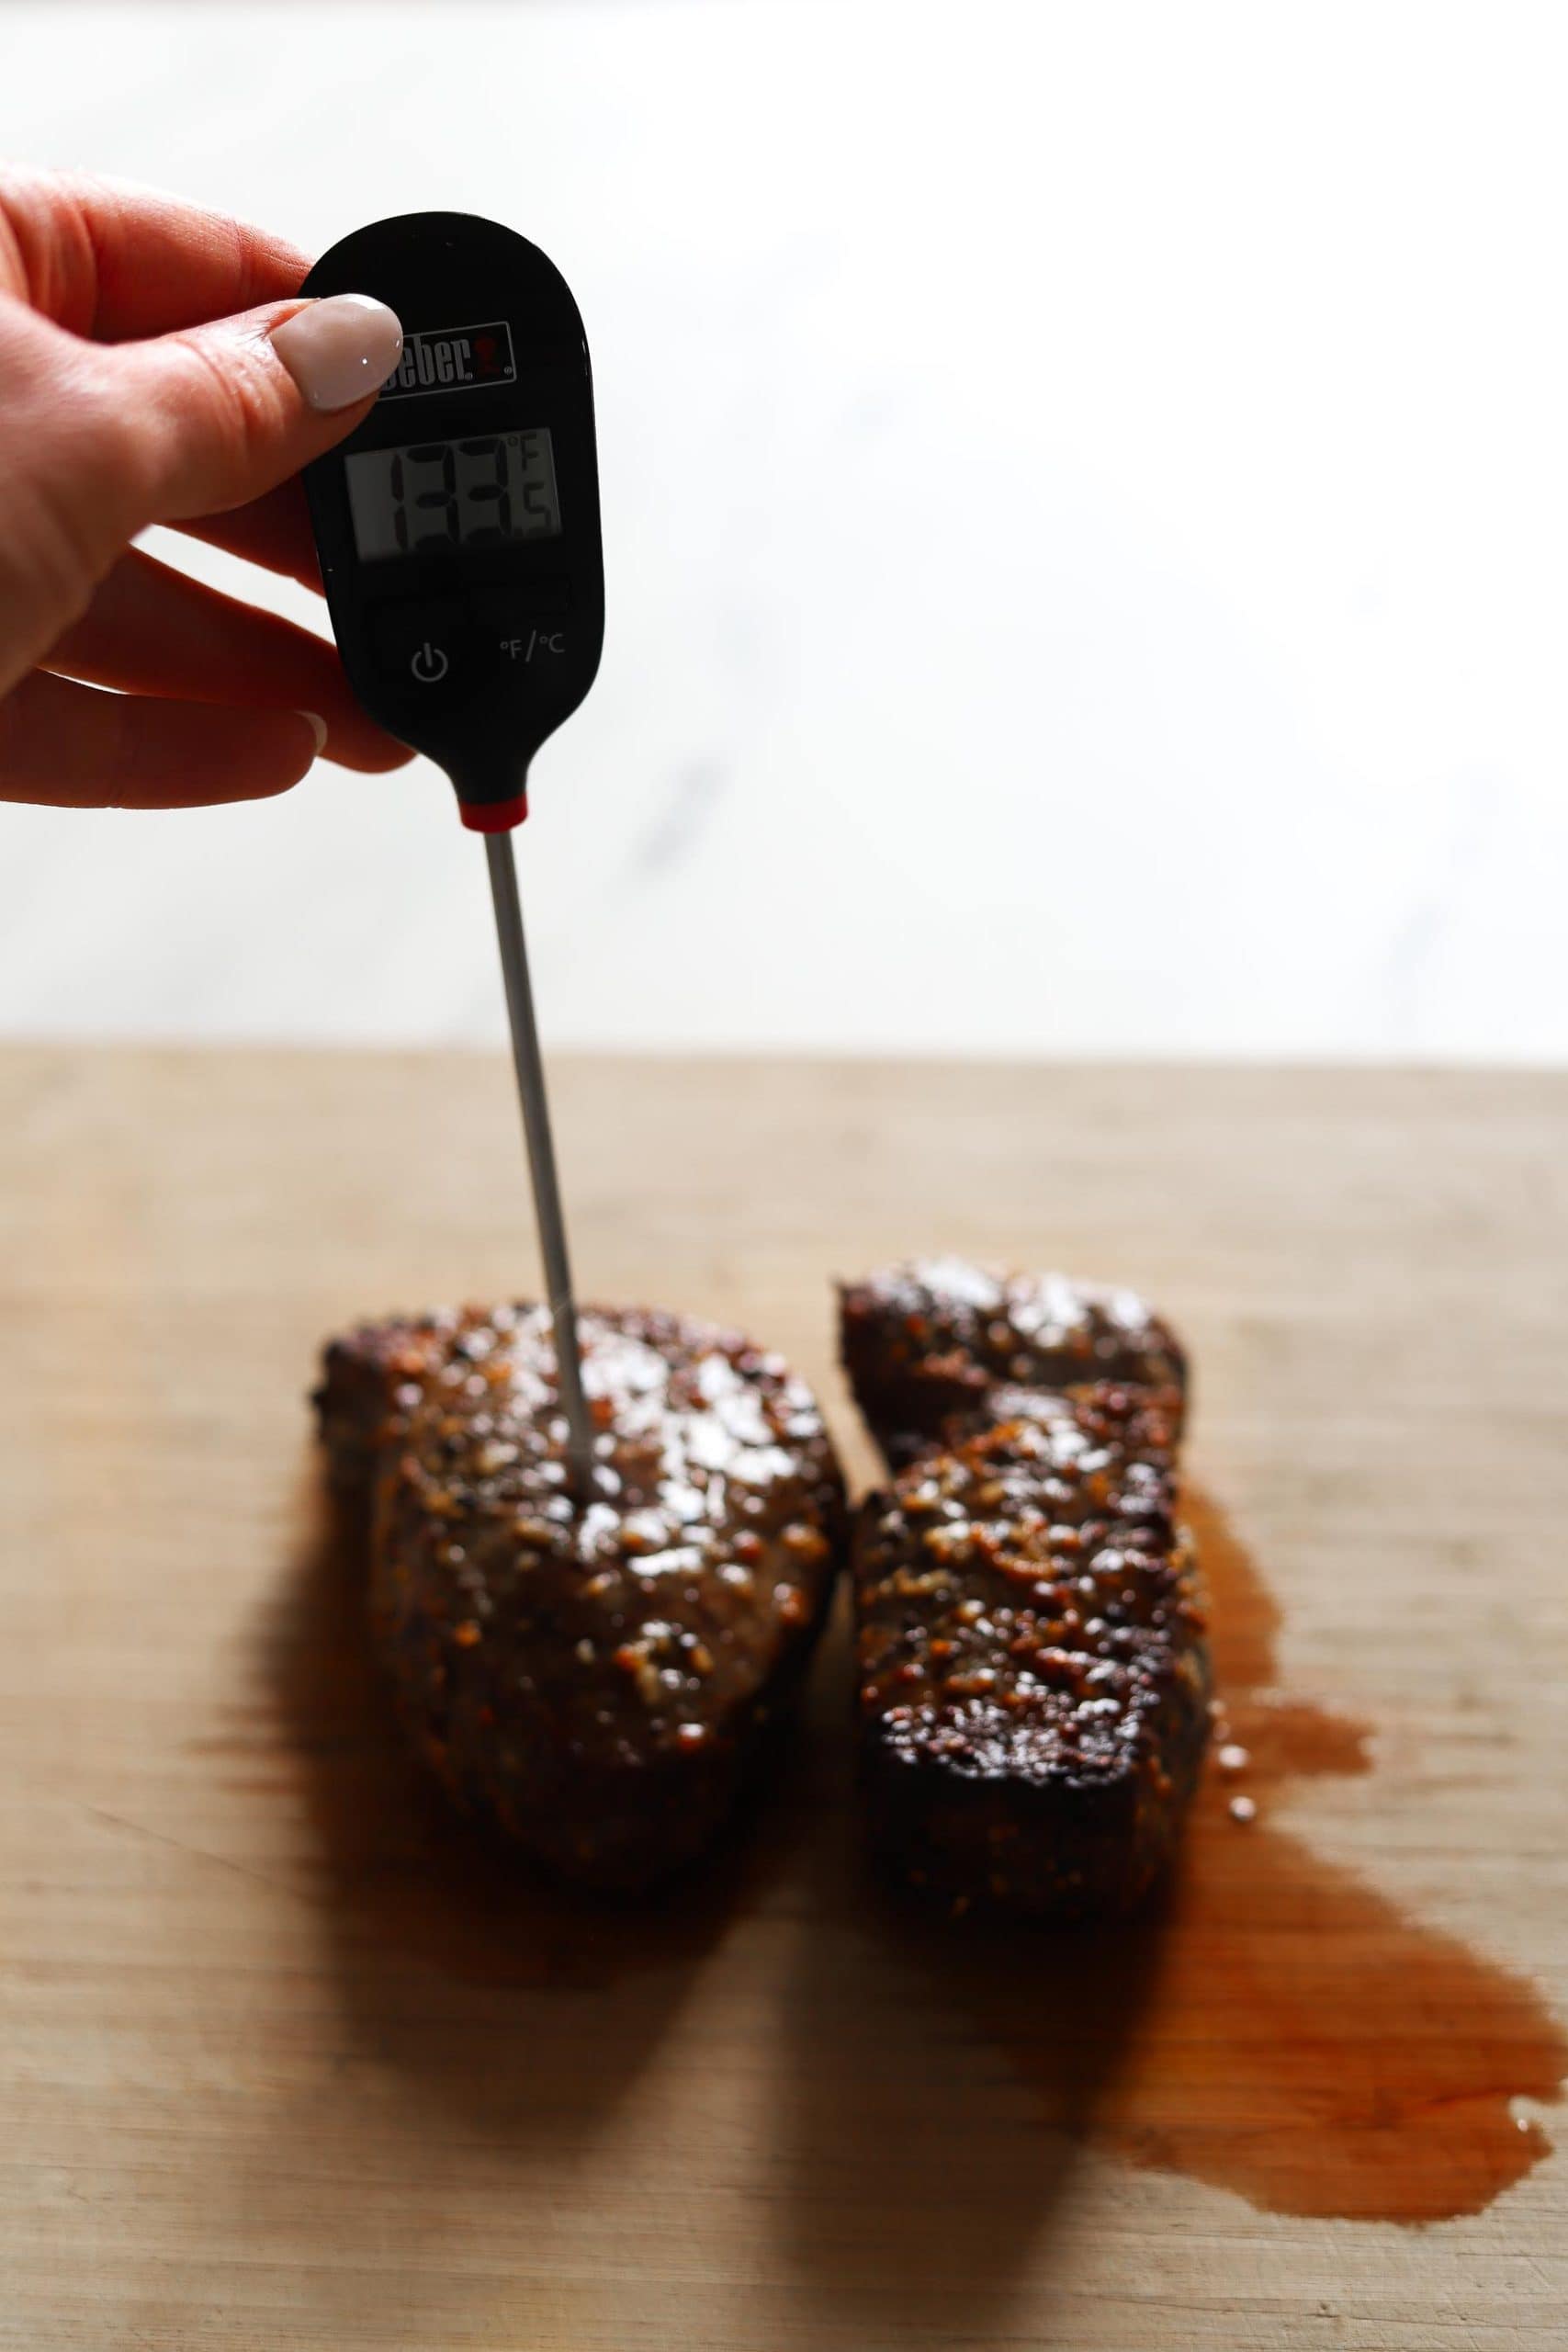 steak with meat thermometer checking temperature